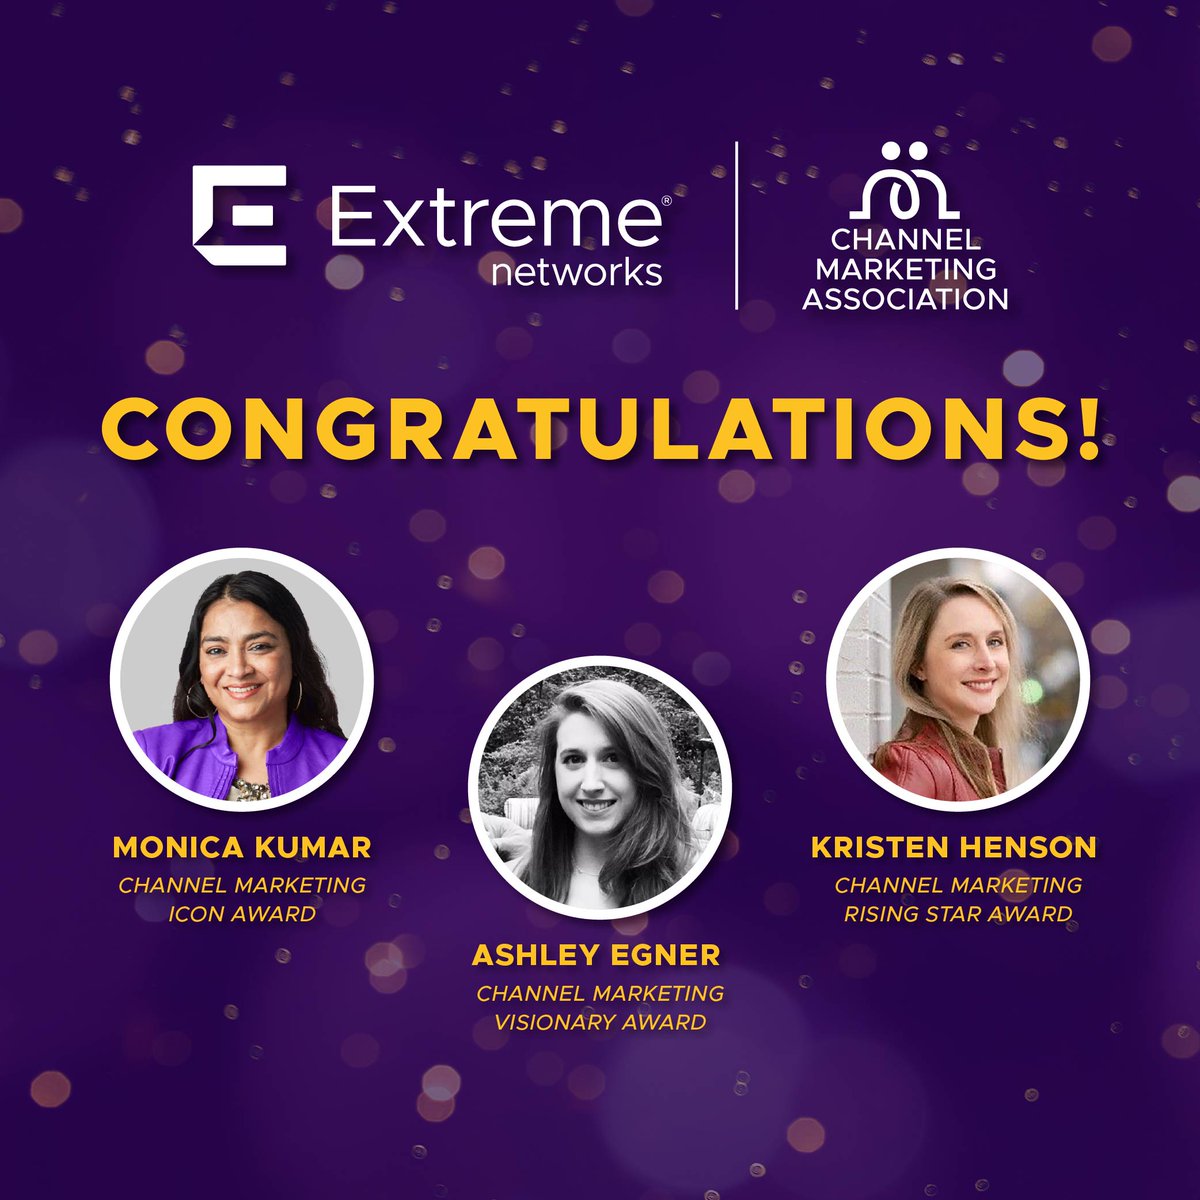 Outstanding work, team! Extreme’s @MBKumar, Ashley Egner, and Kristen Henson were all recognized during the Channel Marketing Association Awards for their contributions and impact on the channel community. #ExtremePartner #ExtremeIgnite #ChannelPartners